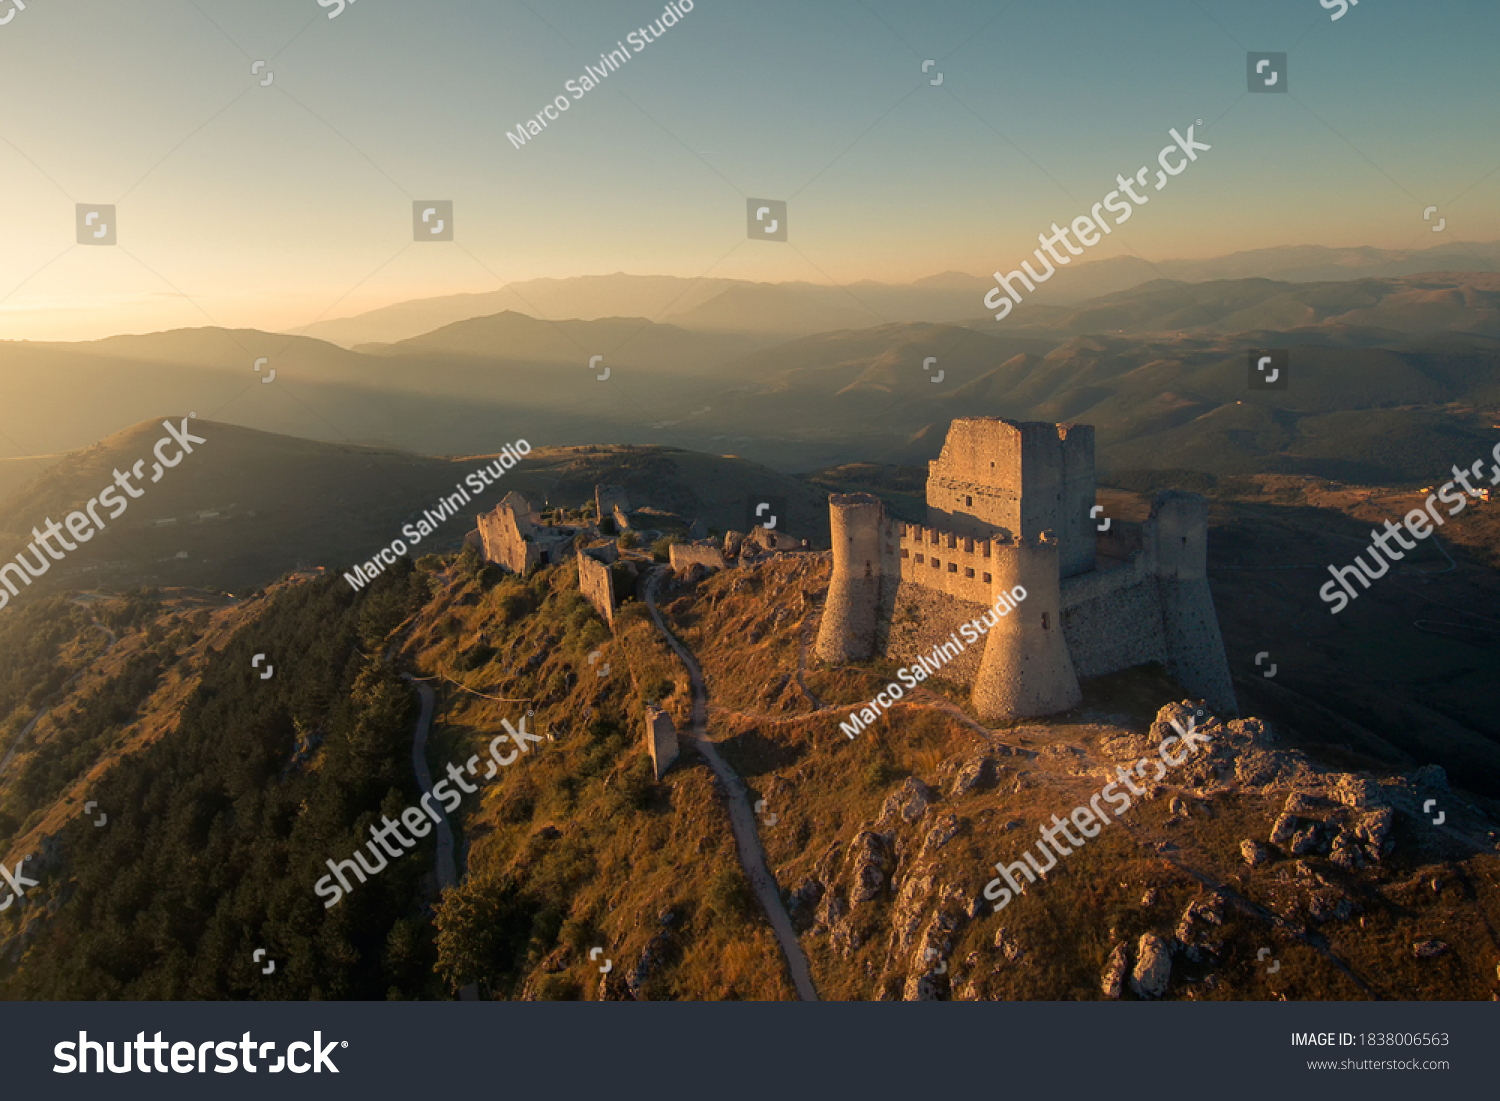 Castle of Rocca Calascio with mountains at sunrise. #1838006563